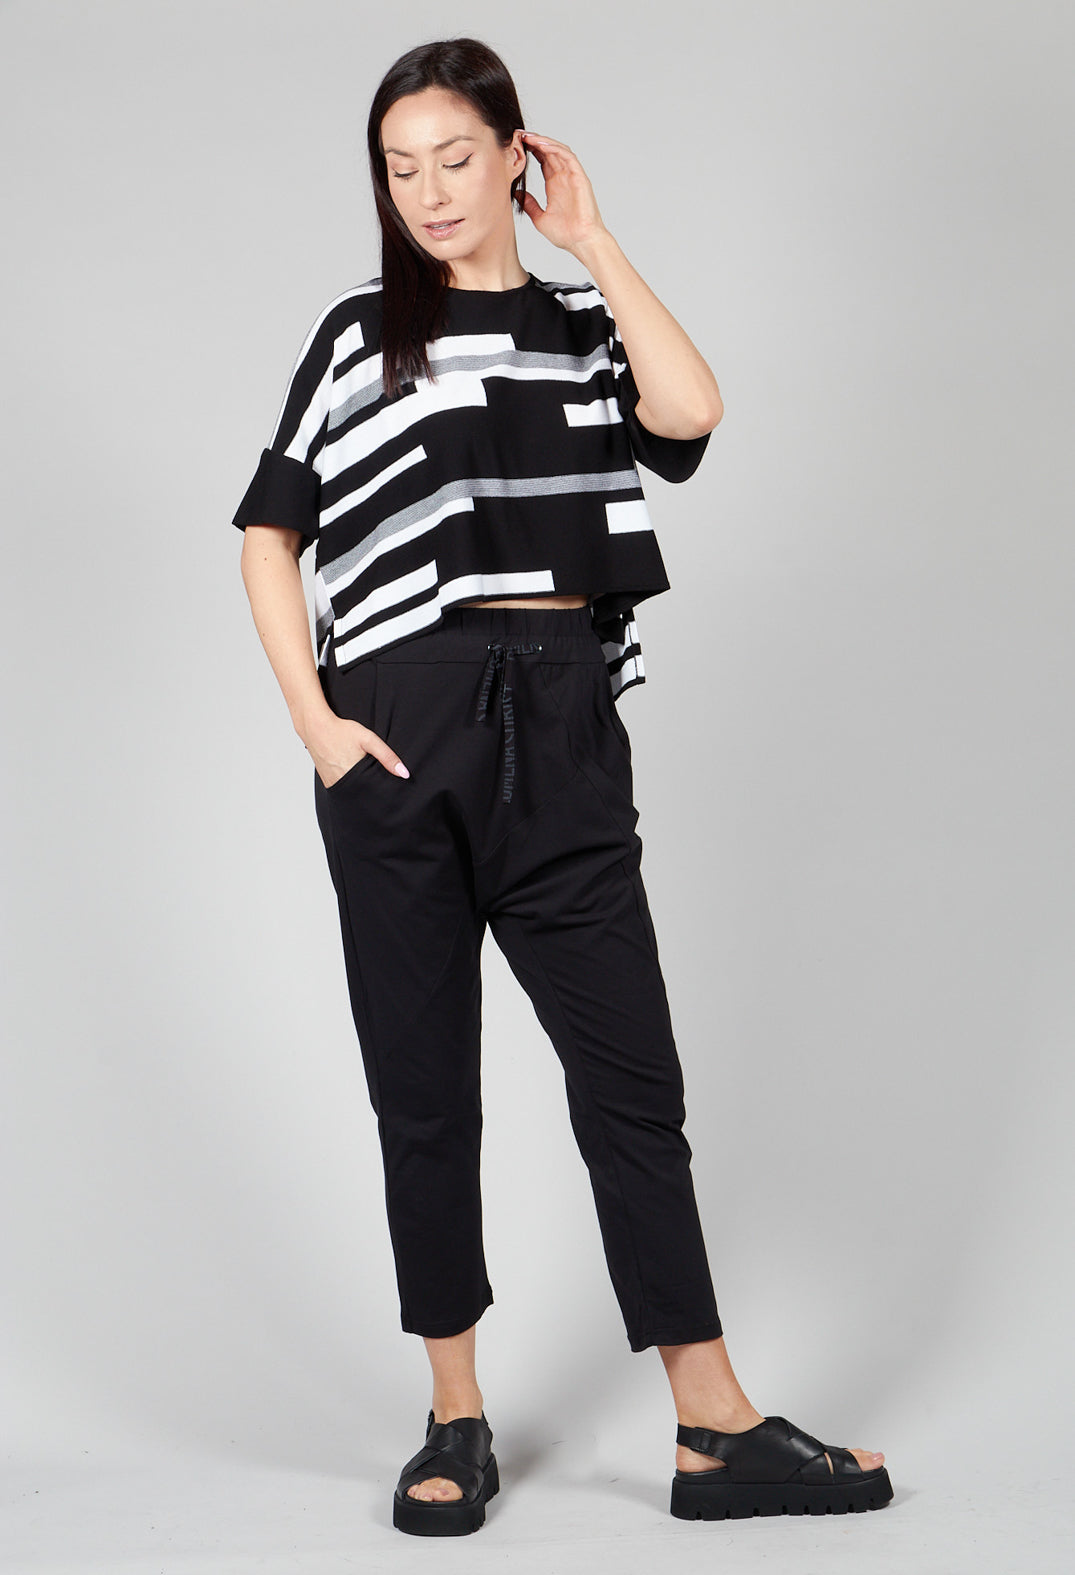 Cropped Short Sleeve Jumper in Black and White